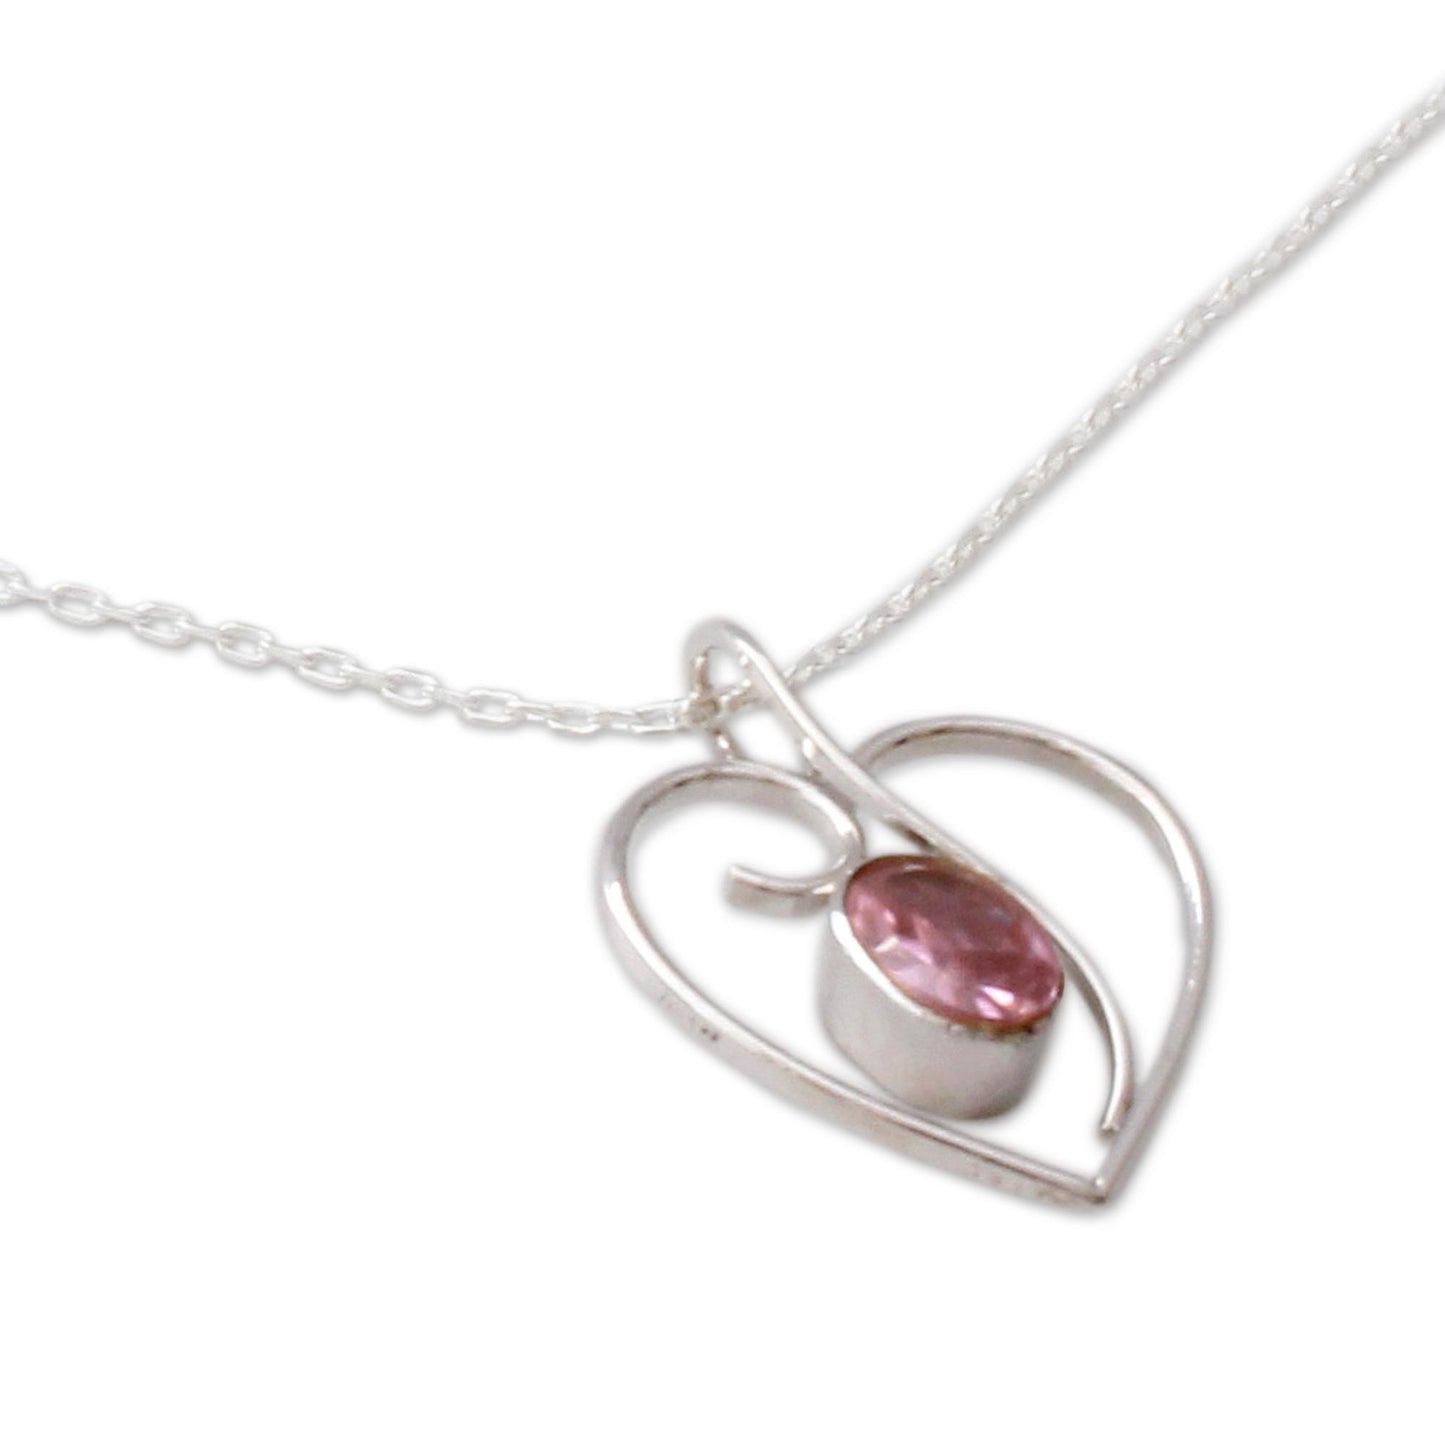 Pink Romance Heart Jewelry Necklace in Sterling Silver and Pink CZ